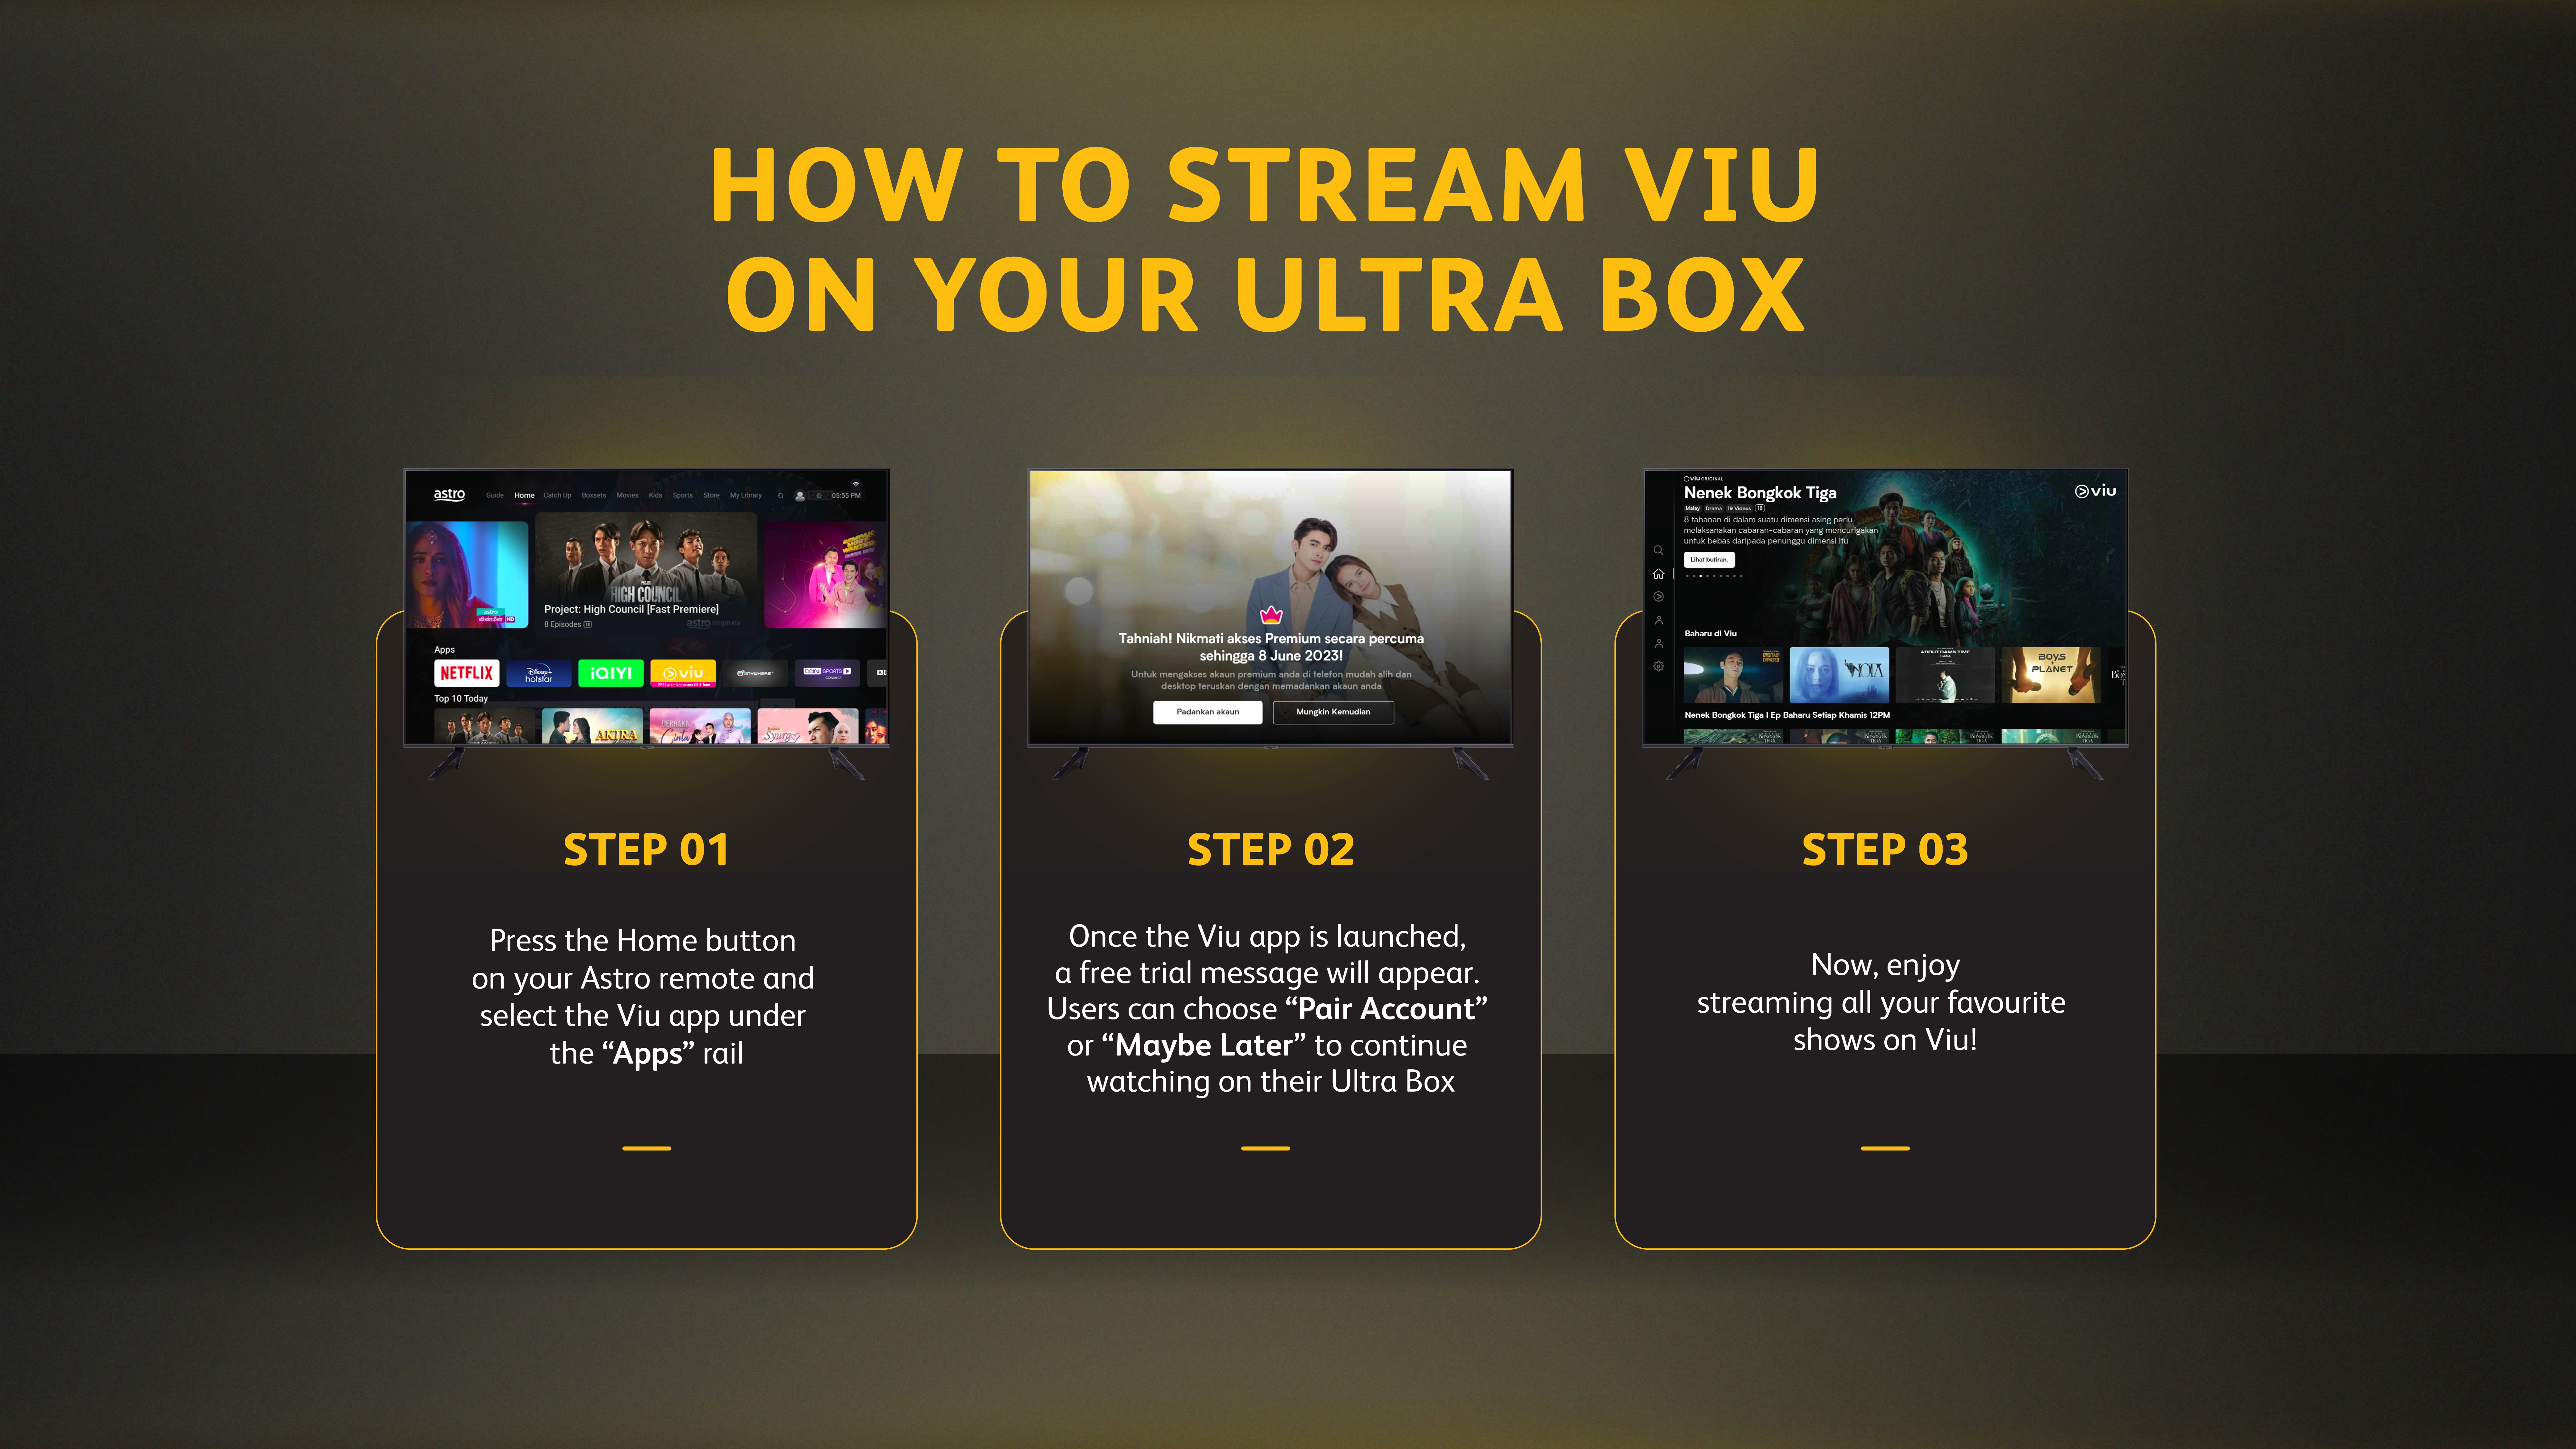 How to Stream Viu on your Ultra